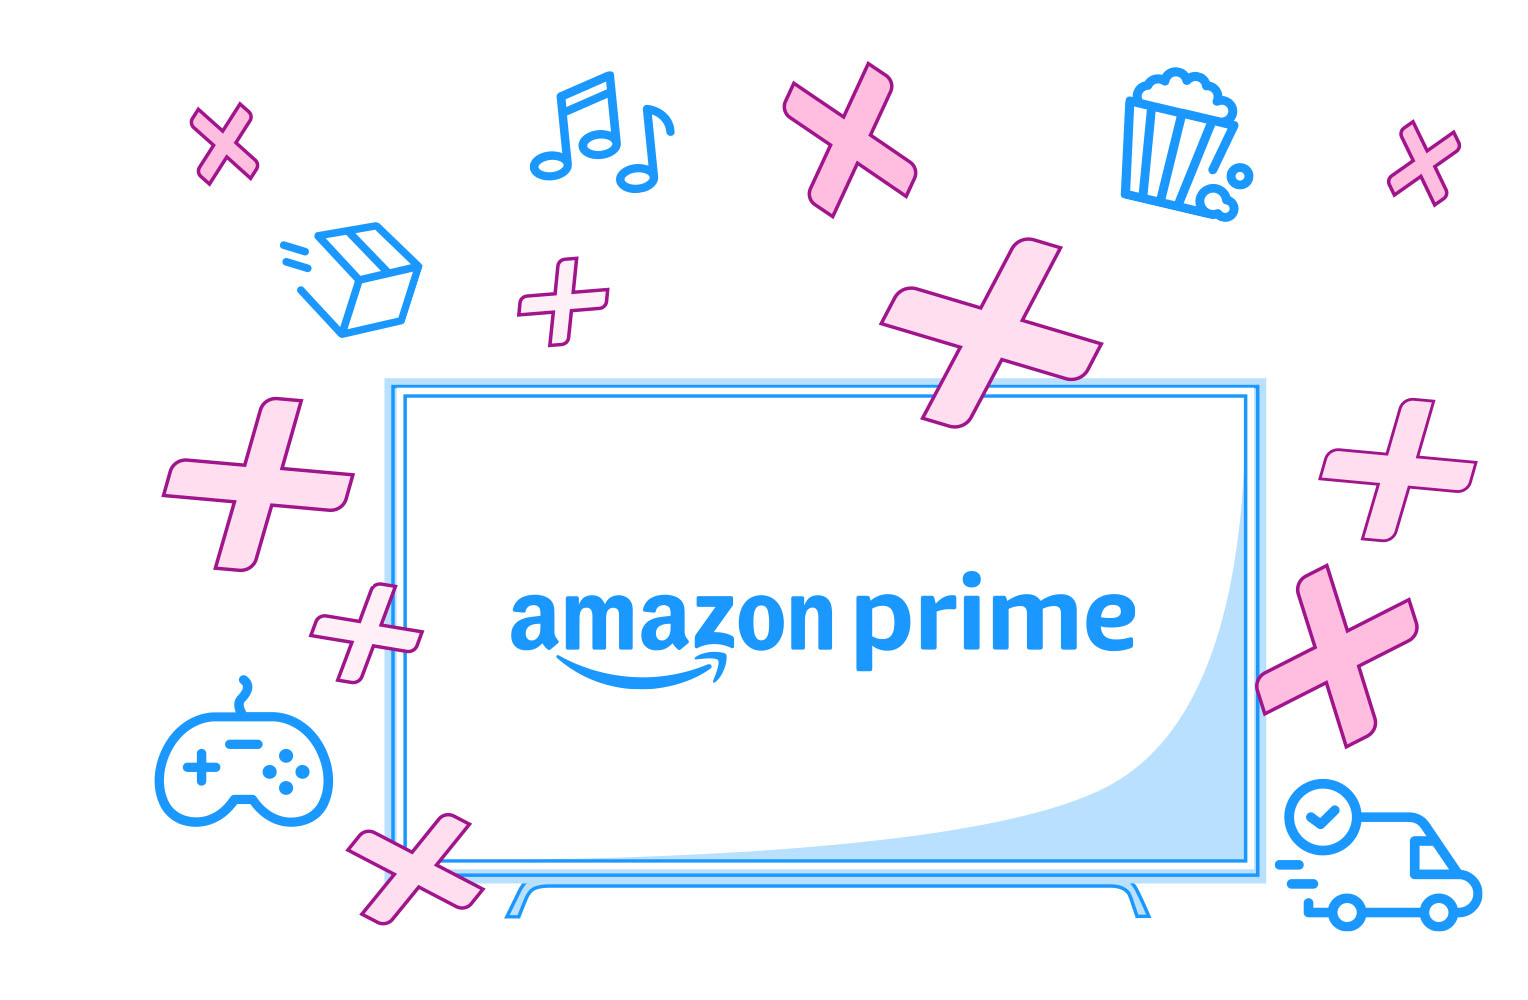 Get Amazon Prime 3-month membership for 8,000 Telstra points